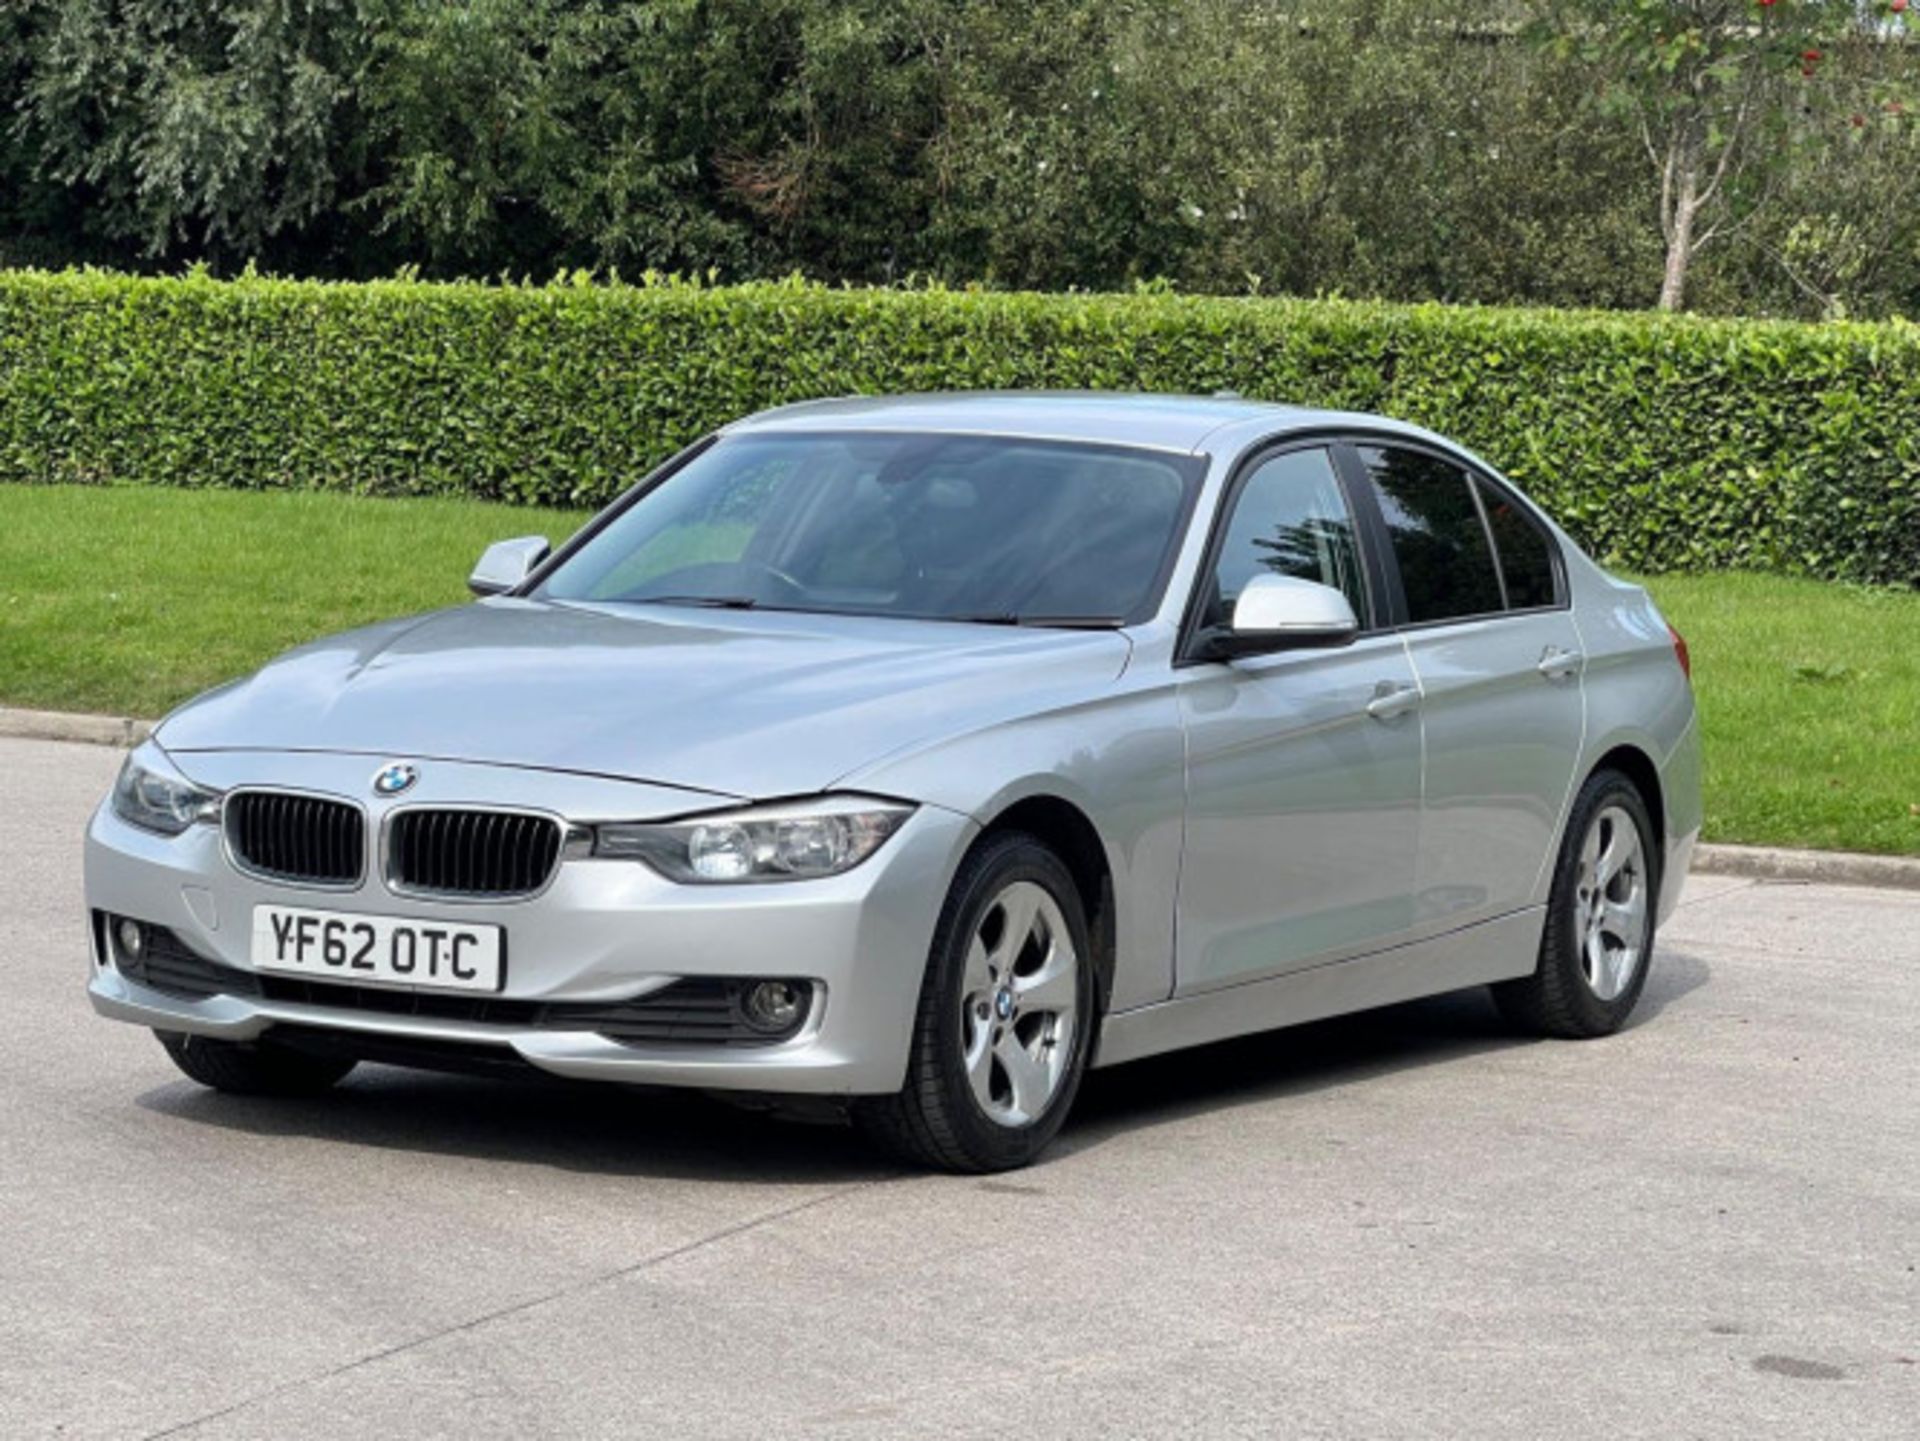 BMW 3 SERIES 2.0 DIESEL ED START STOP - A WELL-MAINTAINED GEM >>--NO VAT ON HAMMER--<< - Image 221 of 229